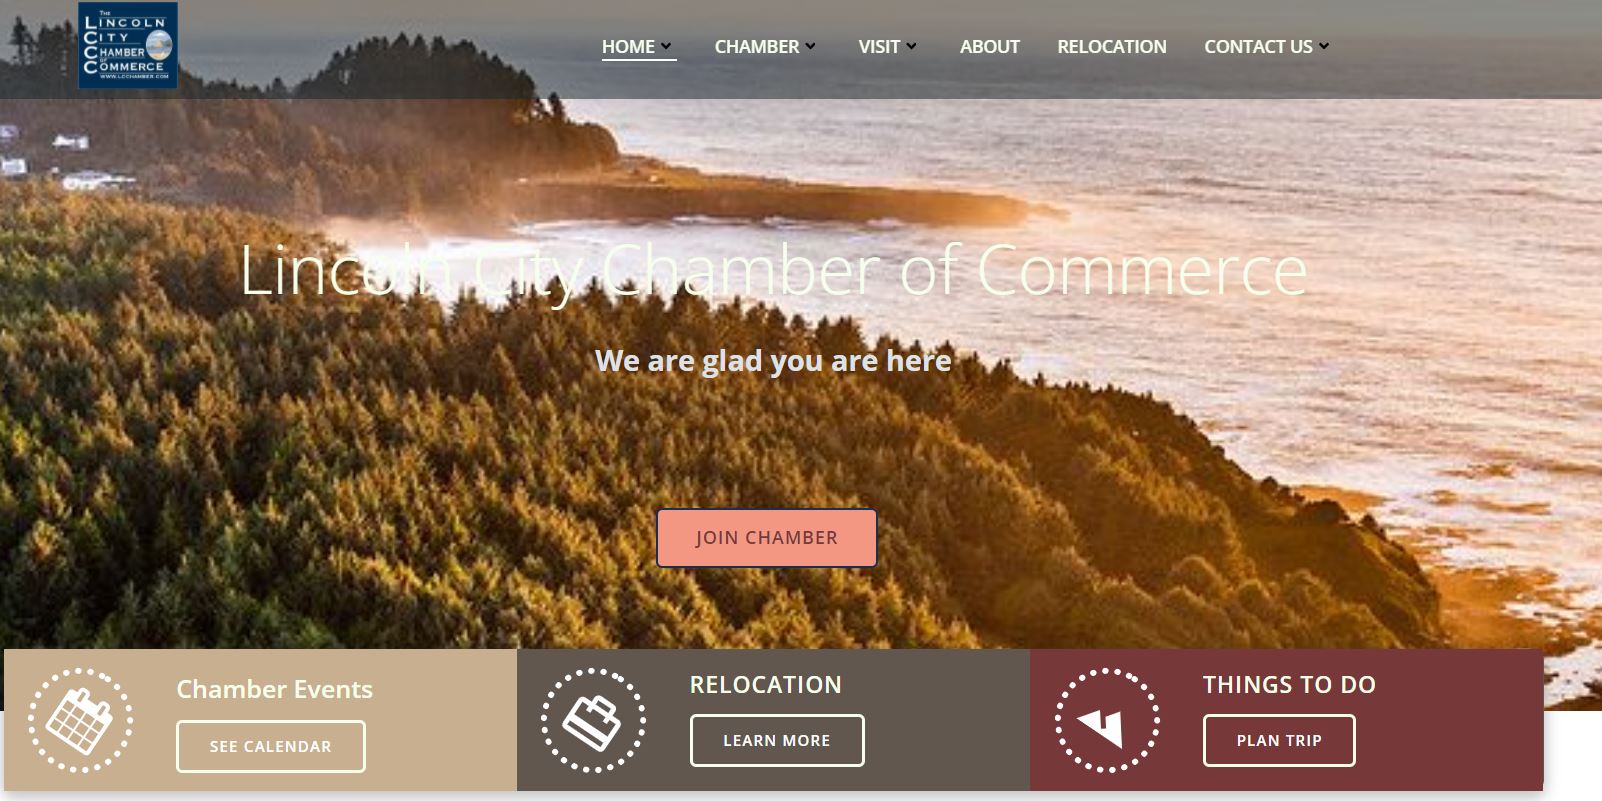 Lincoln City Chamber Website